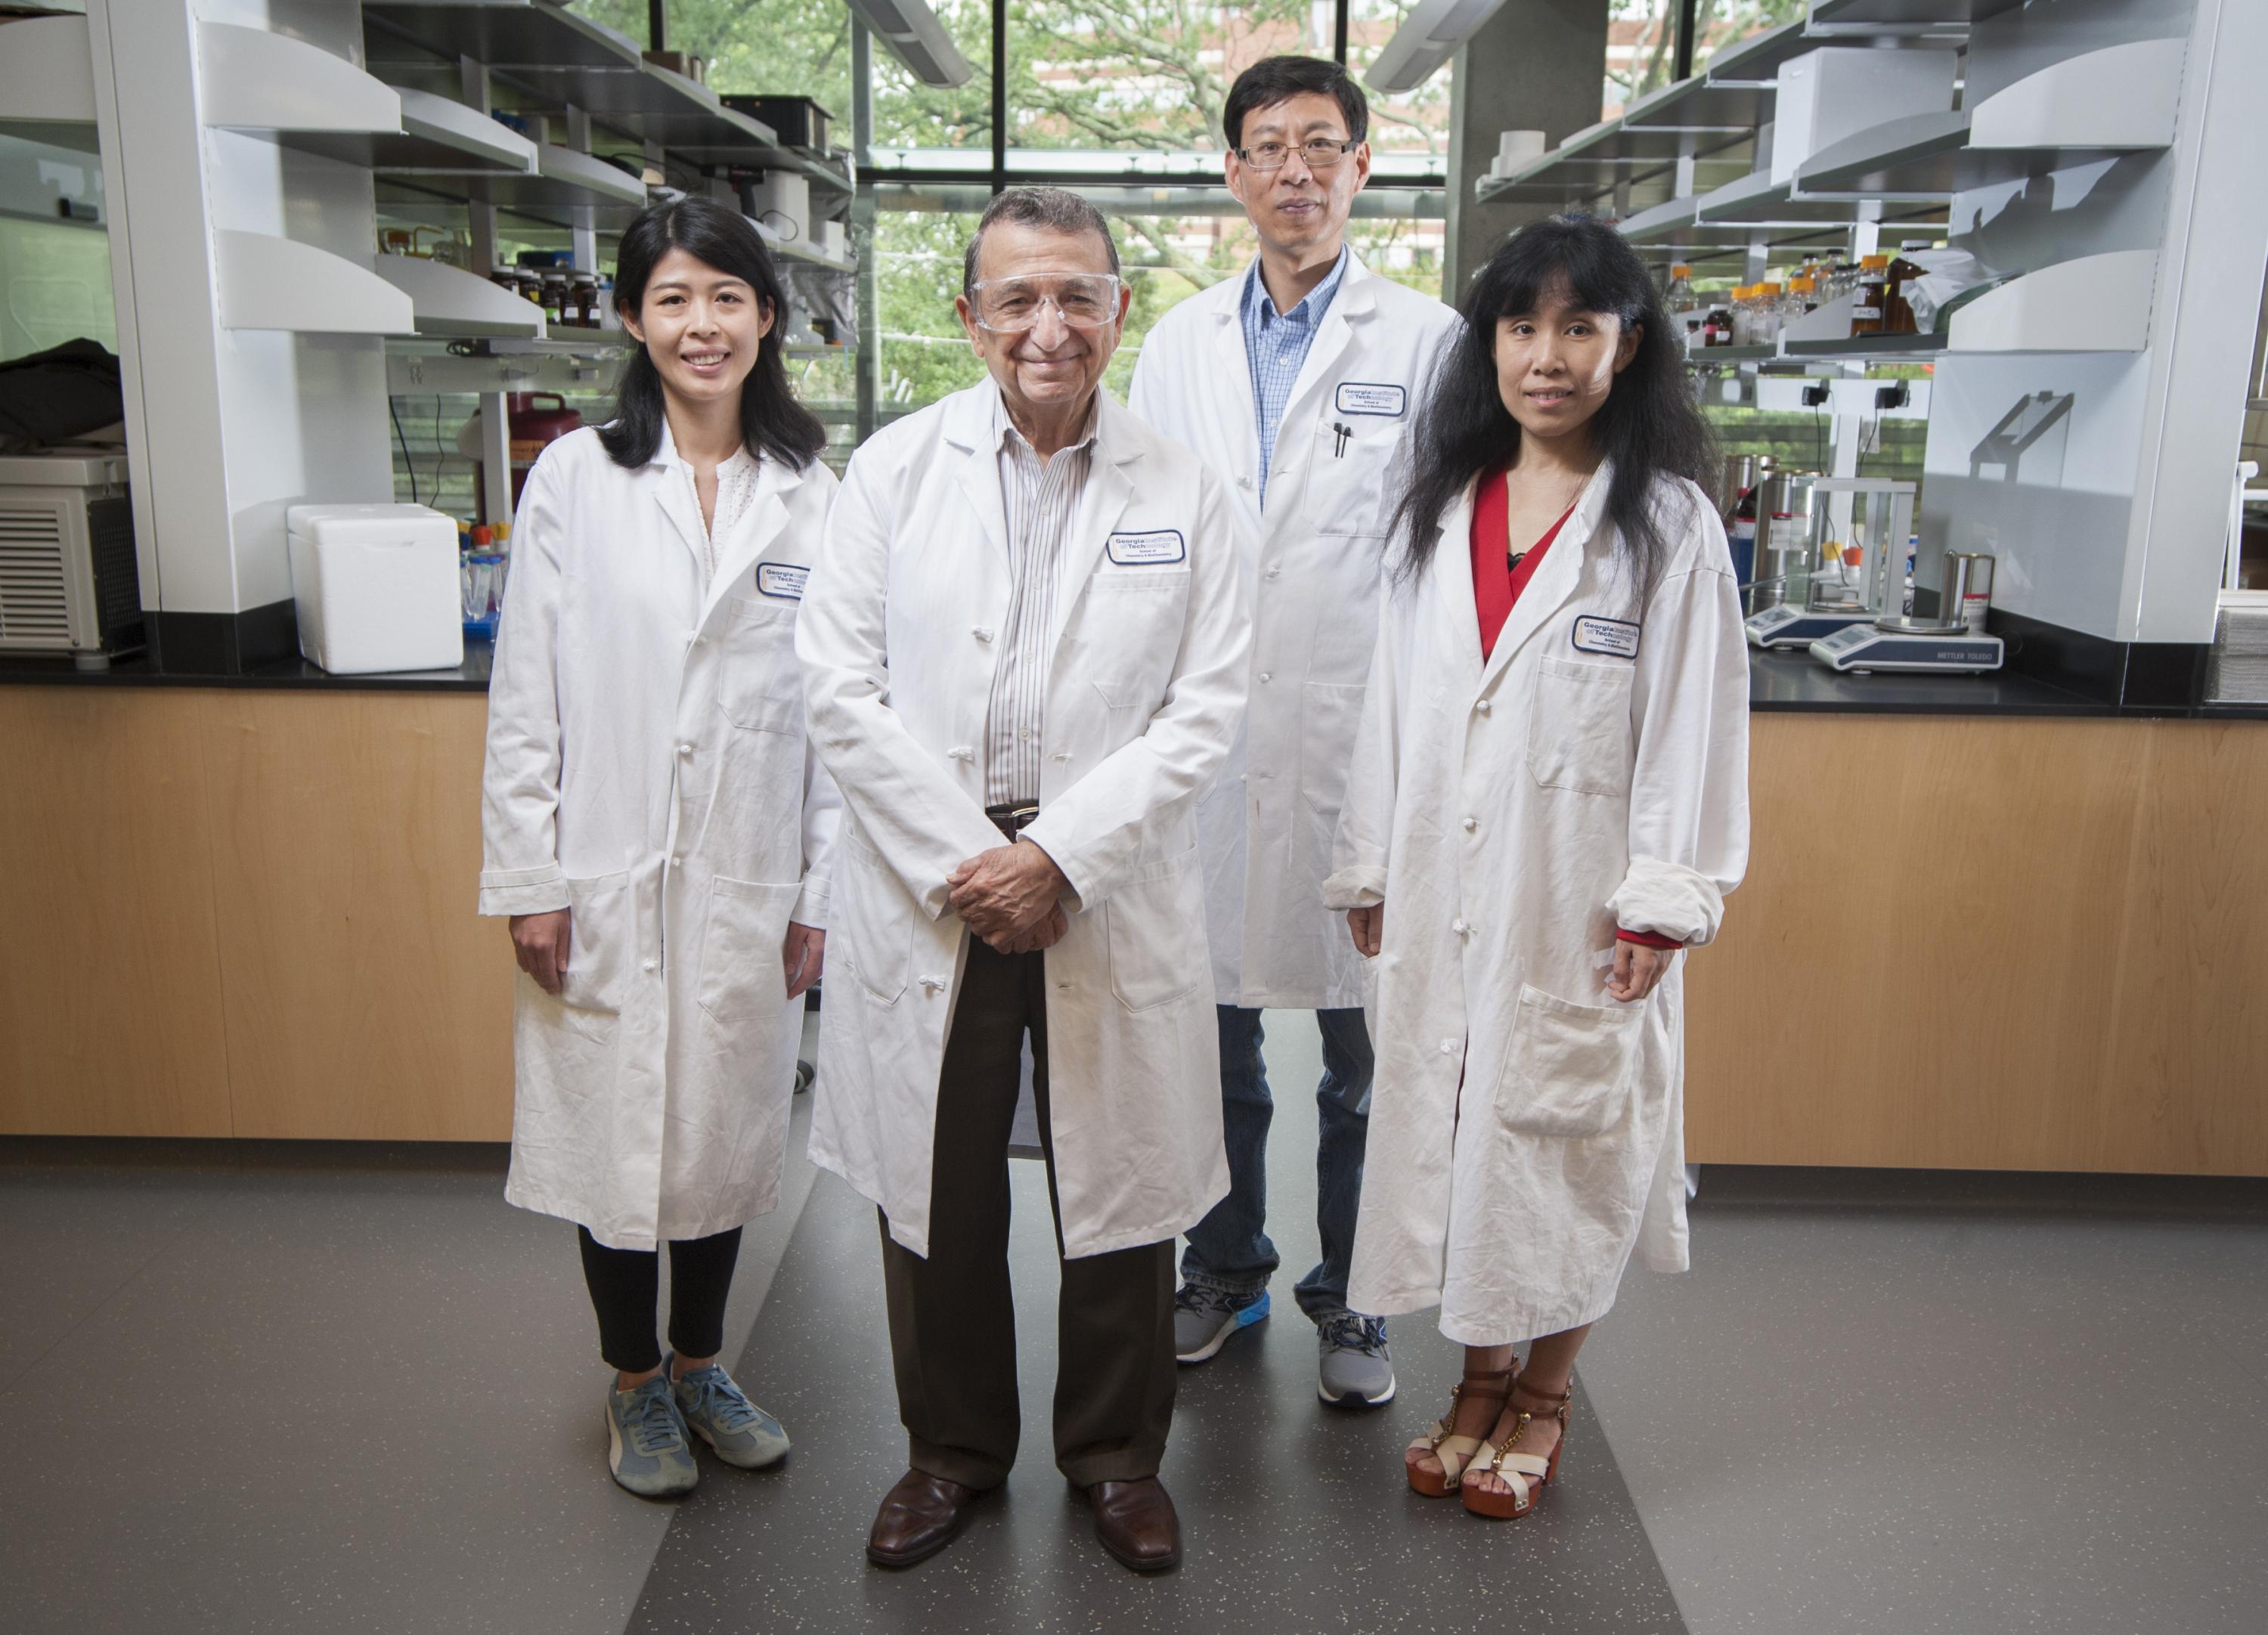 Georgia Tech's Regents Professor Mostafa El-Sayed (front) is one of the most highly decorated and cited living chemists. With his team for this research from left to right: Yue Wu, Professor Ronghu Wu, and Yan Tang. Credit: Georgia Tech / Christopher Moore